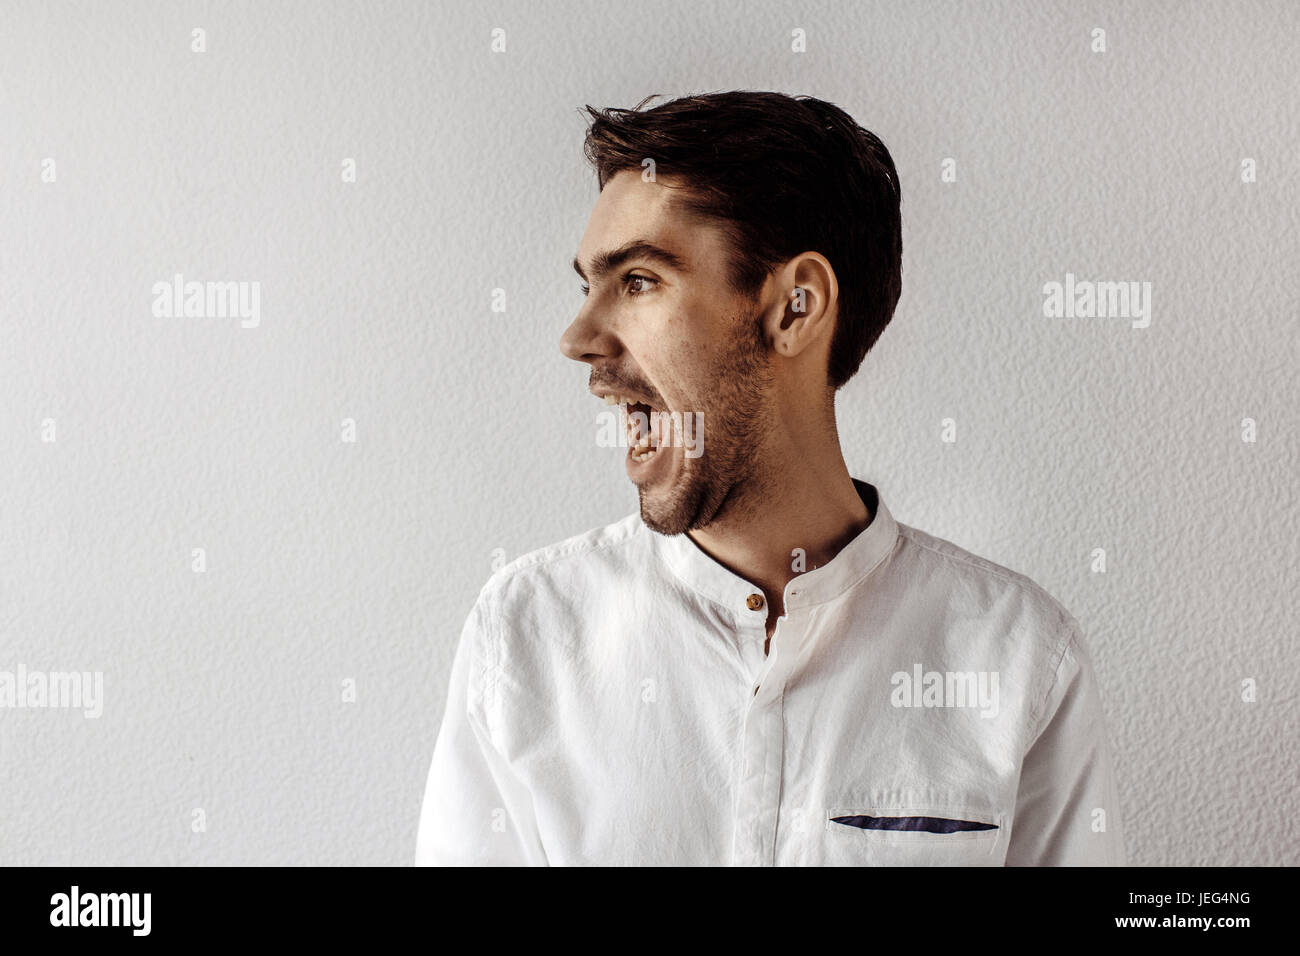 Man standing and yelling Stock Photo